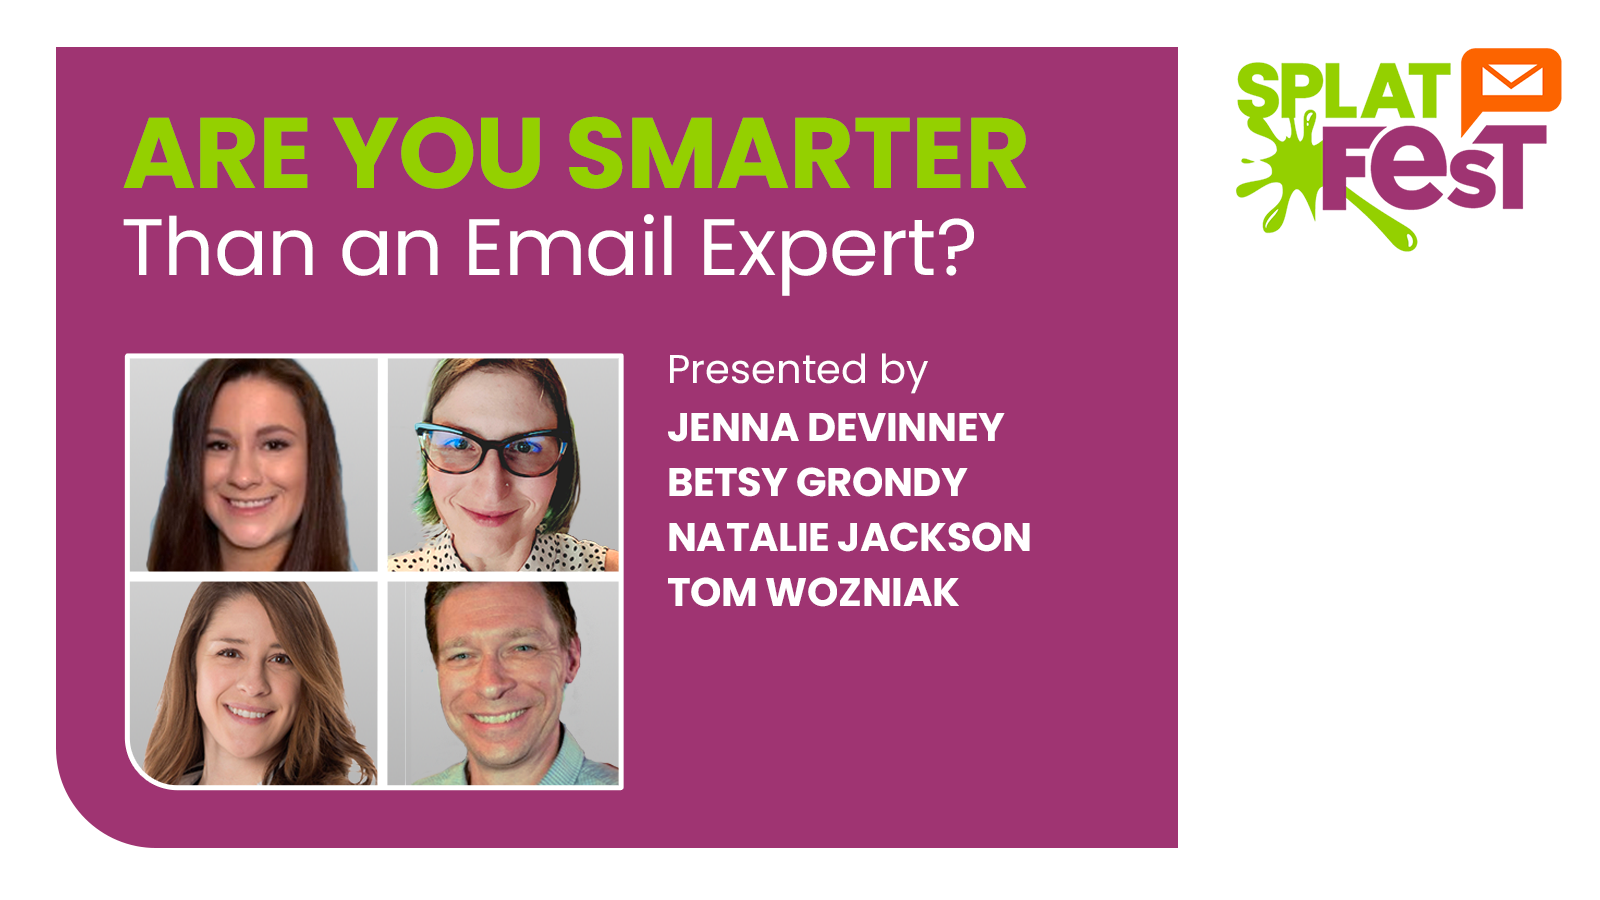 Photos of panelists for Are You Smarter than an Email Expert? game show